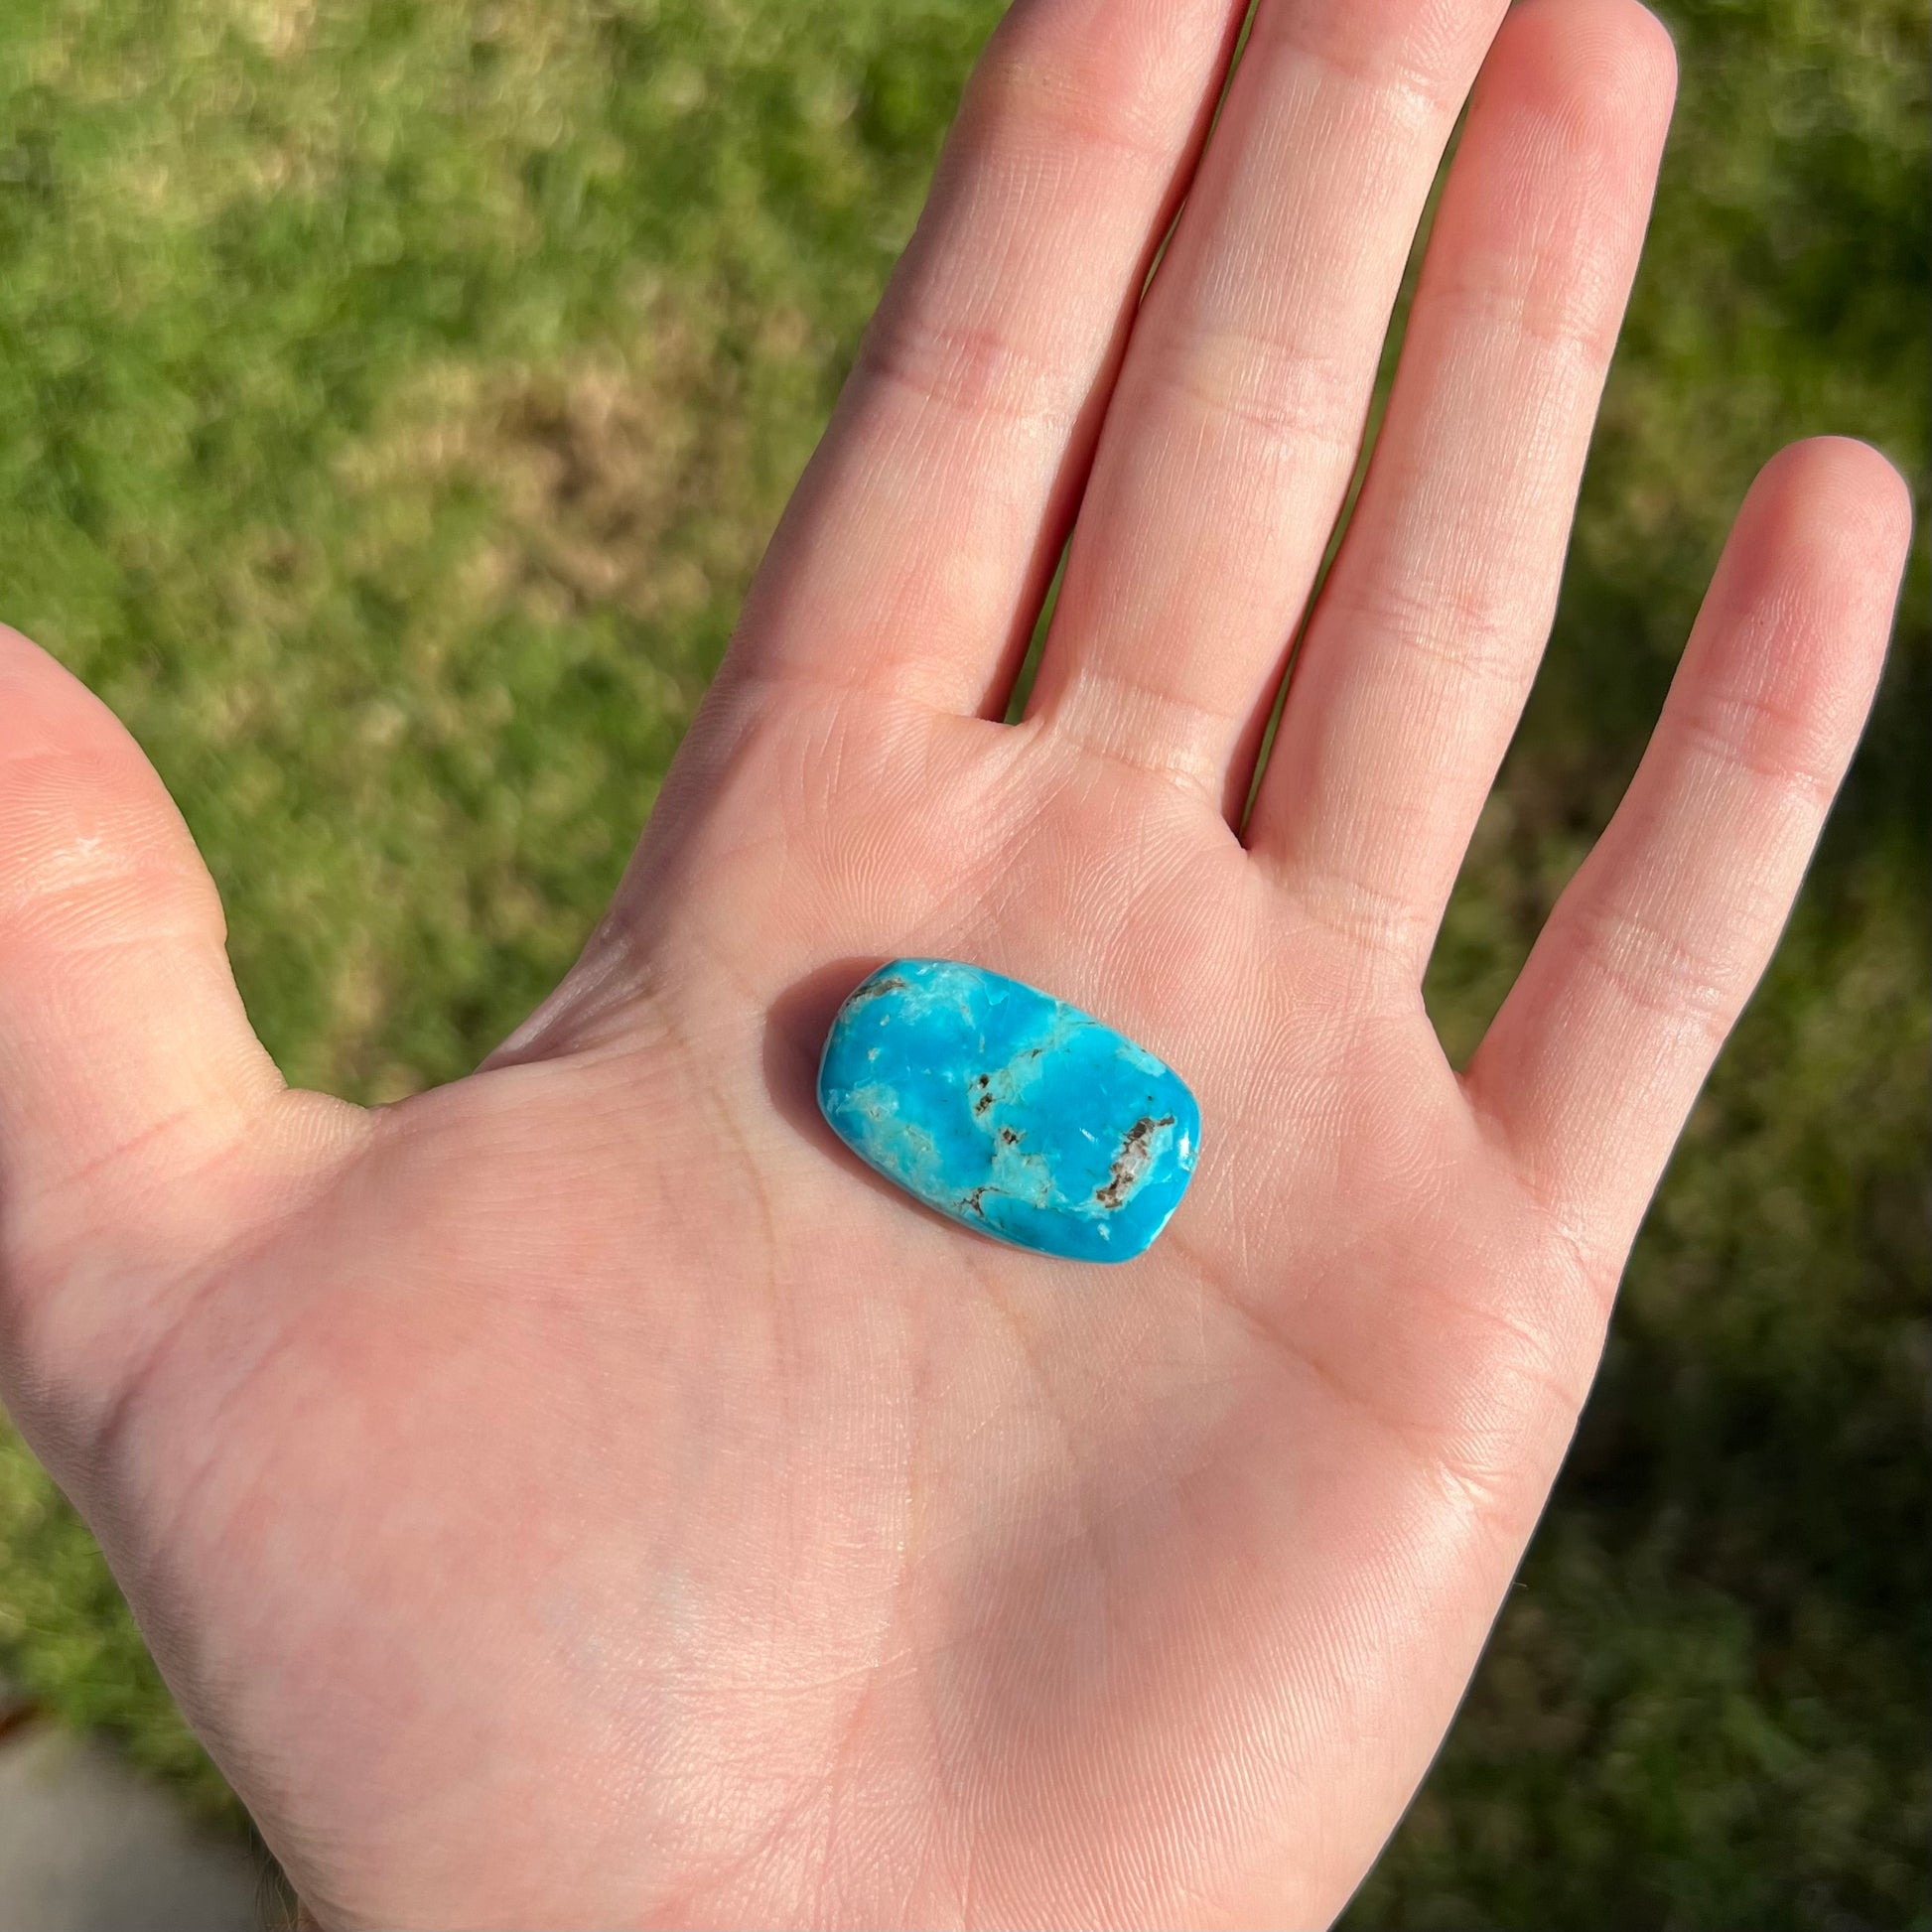 A blue barrel cabochon cut turquoise stone from the Sleeping Beauty Mine.